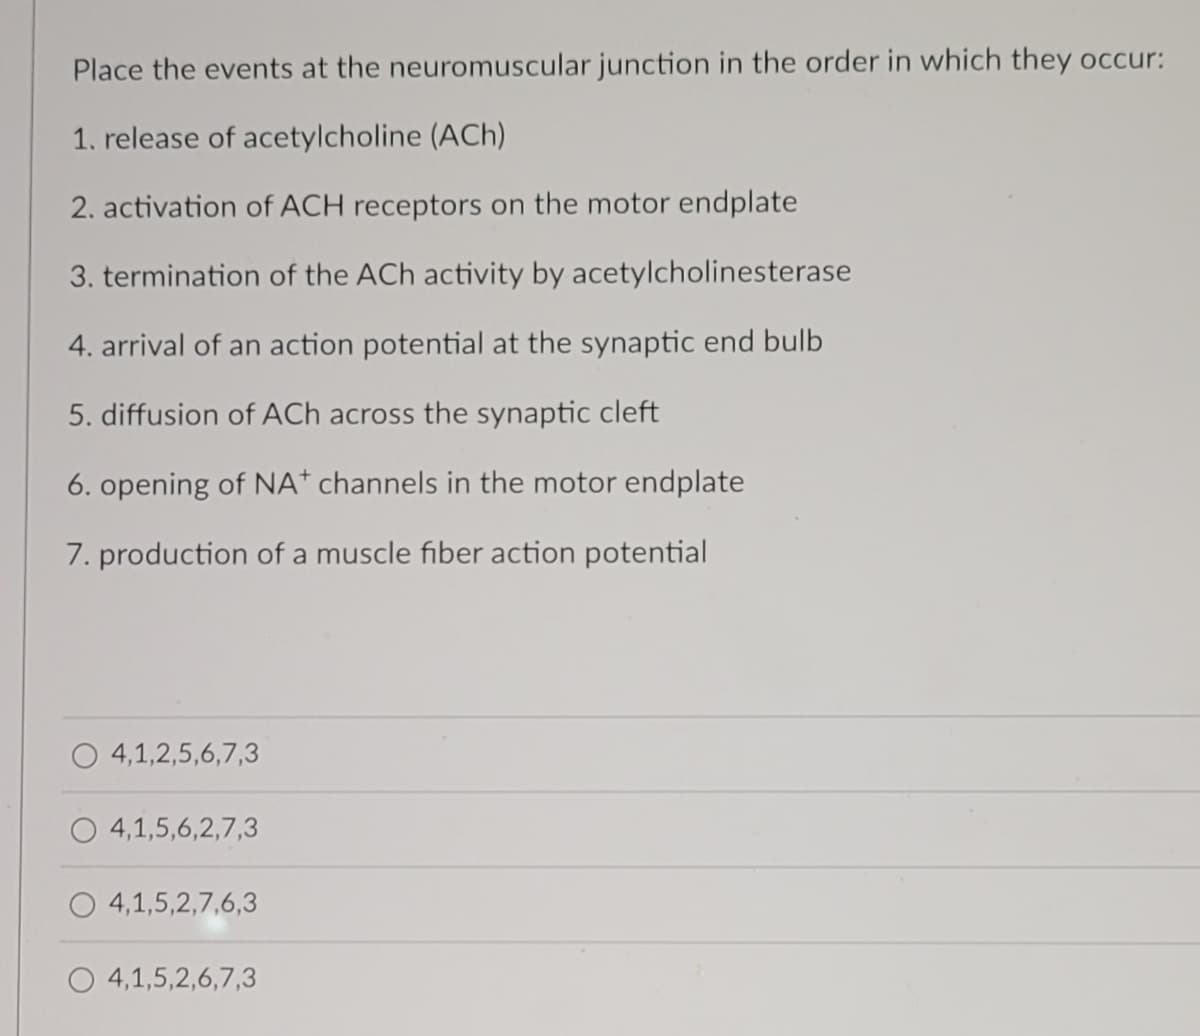 Place the events at the neuromuscular junction in the order in which they occur:
1. release of acetylcholine (ACh)
2. activation of ACH receptors on the motor endplate
3. termination of the ACh activity by acetylcholinesterase
4. arrival of an action potential at the synaptic end bulb
5. diffusion of ACh across the synaptic cleft
6. opening of NA* channels in the motor endplate
7. production of a muscle fiber action potential
O 4,1,2,5,6,7,3
4,1,5,6,2,7,3
4,1,5,2,7,6,3
4,1,5,2,6,7,3